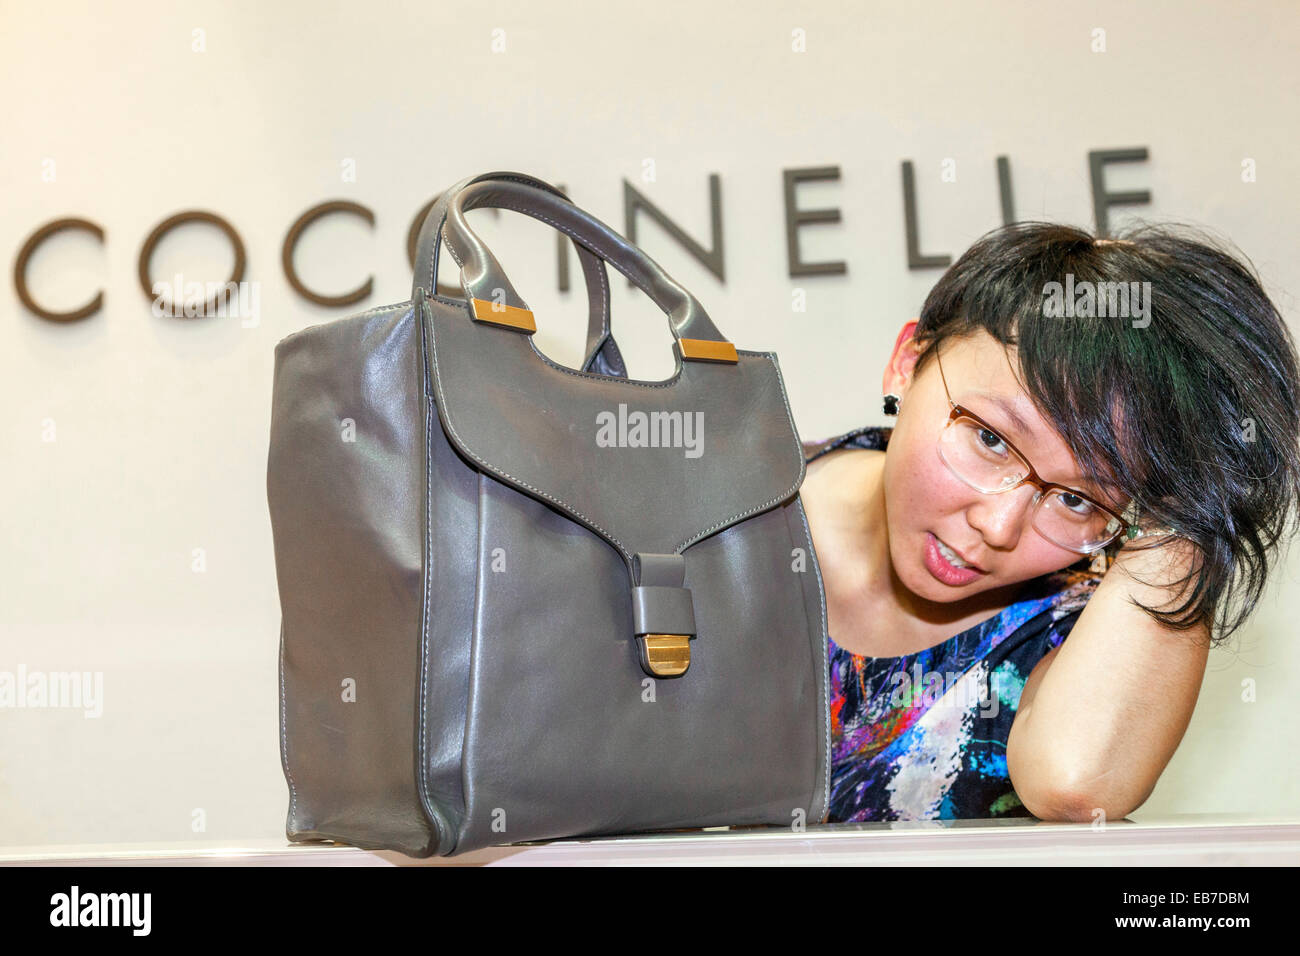 Young Asian woman with a handbag Coccinelle Czech Stock Photo